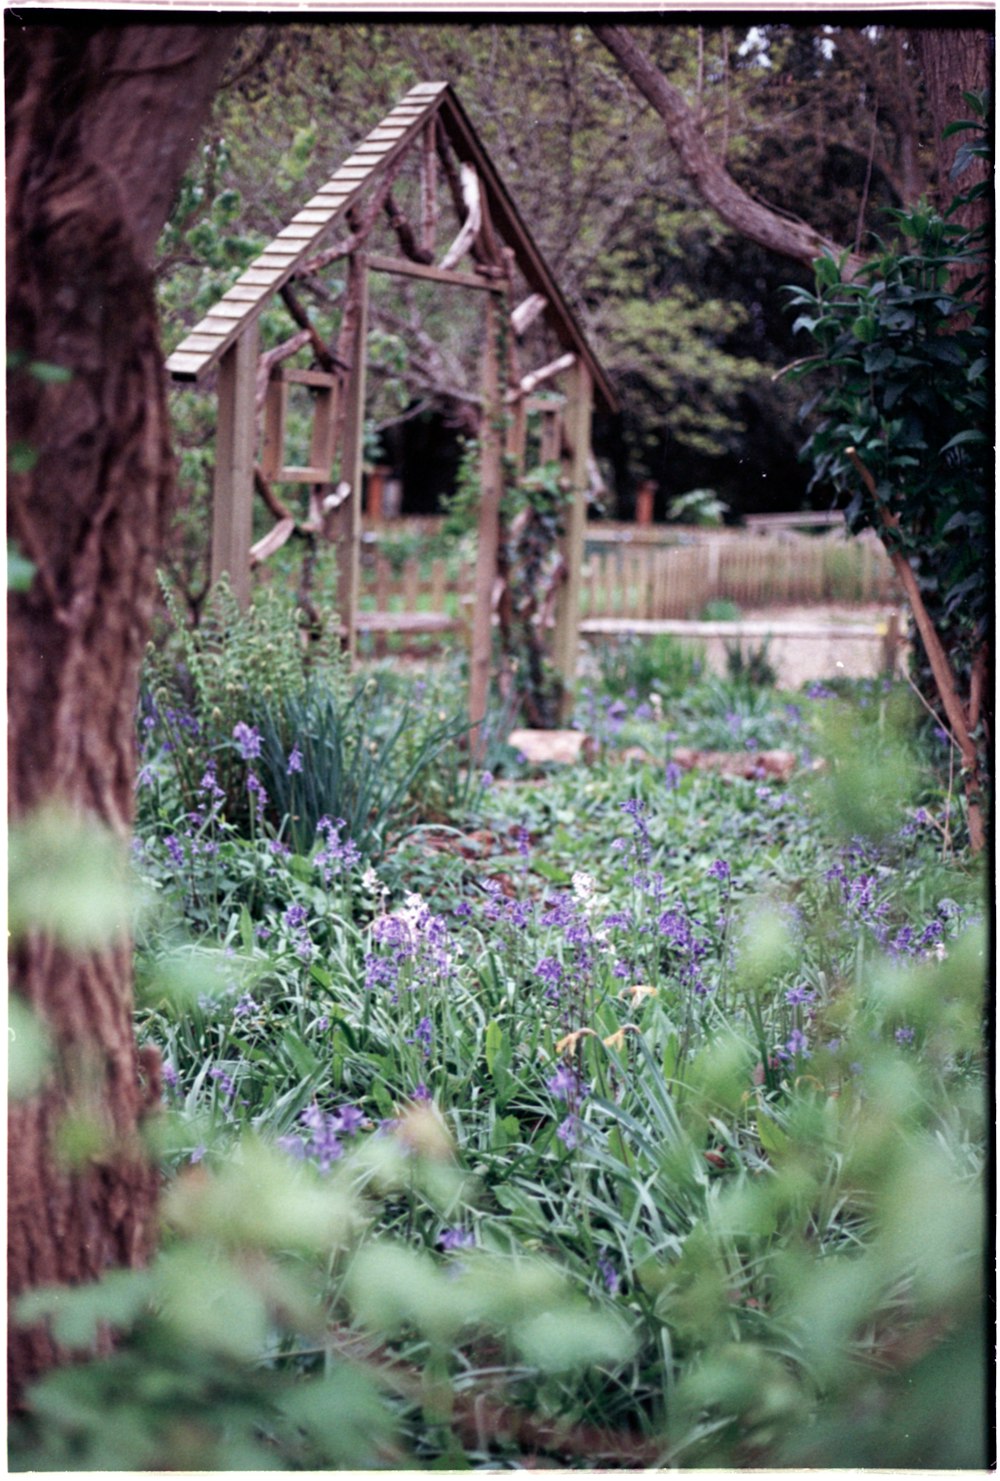 a wooden structure in the middle of a garden